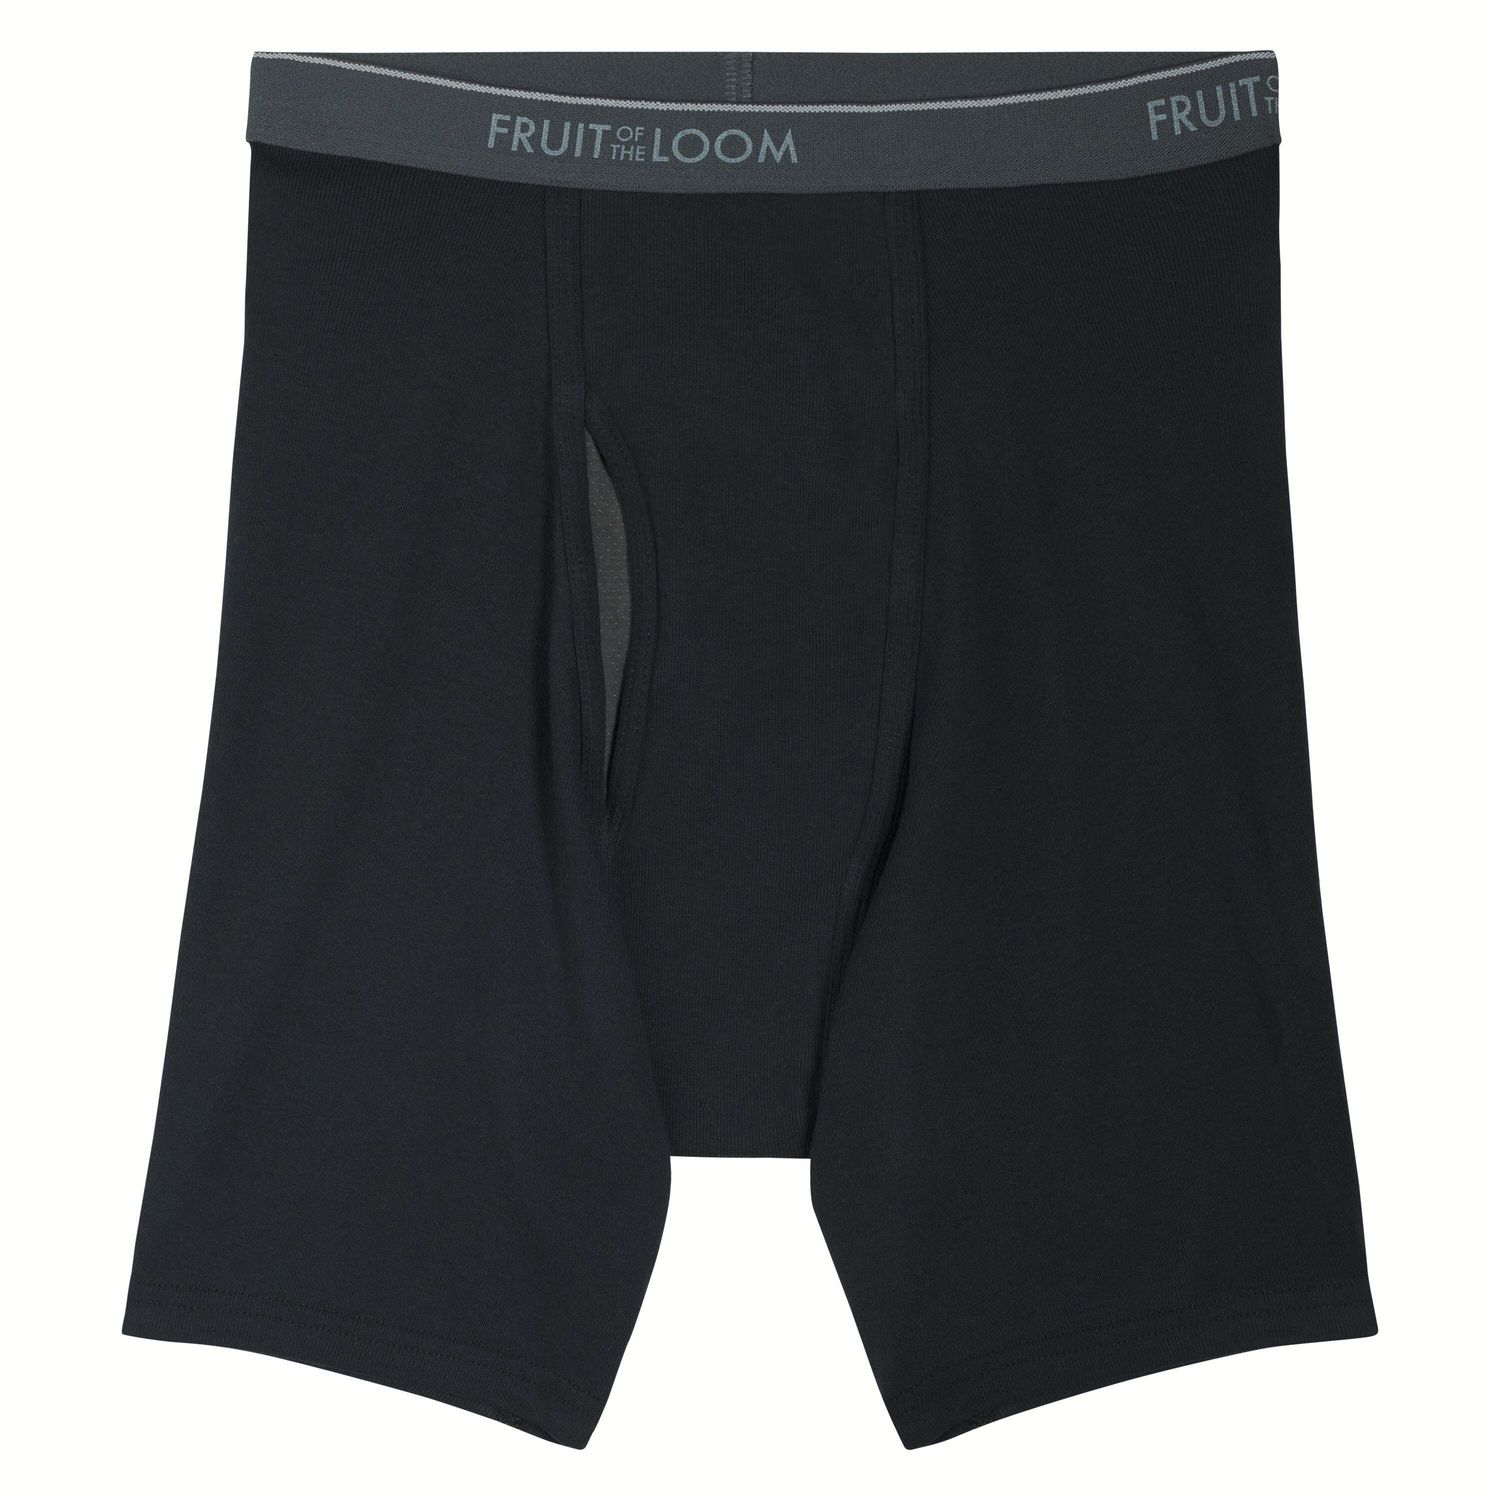 Fruit of the Loom Men's CoolZone Black & Grey Boxer Briefs, 4-Pack, Sizes:  S-XL 